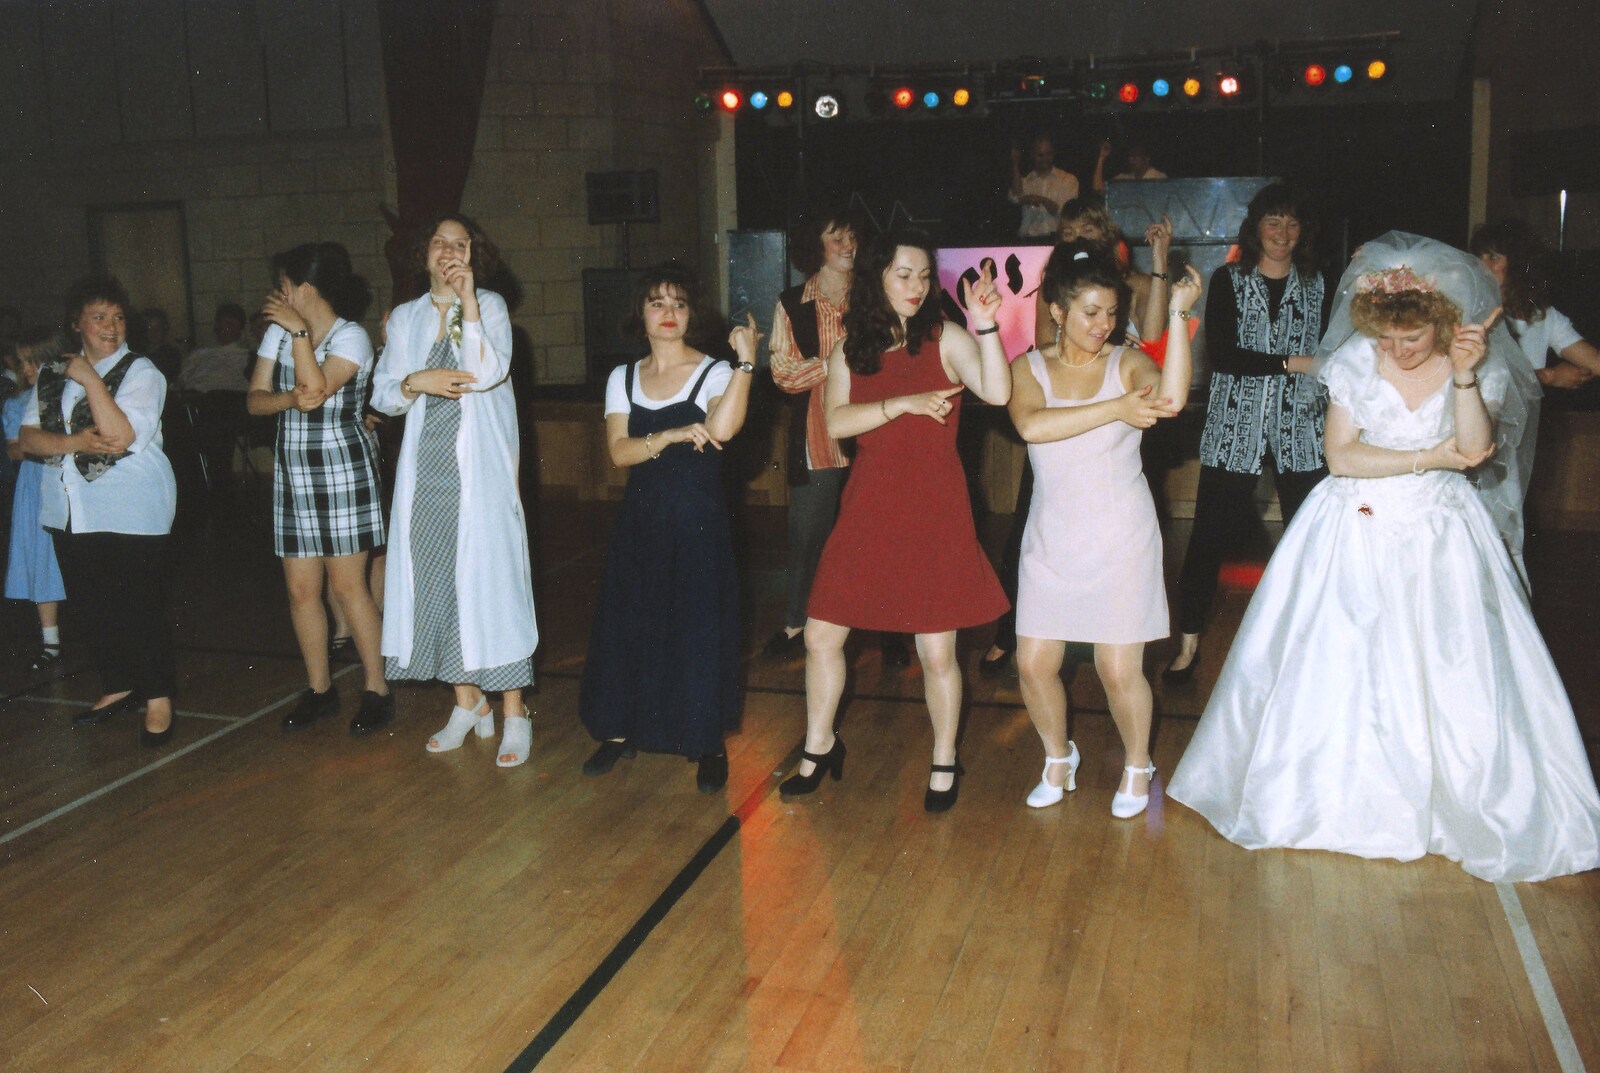 Some sort of wedding dancing occurs from Debbie's Wedding, Suffolk - 12th June 1999